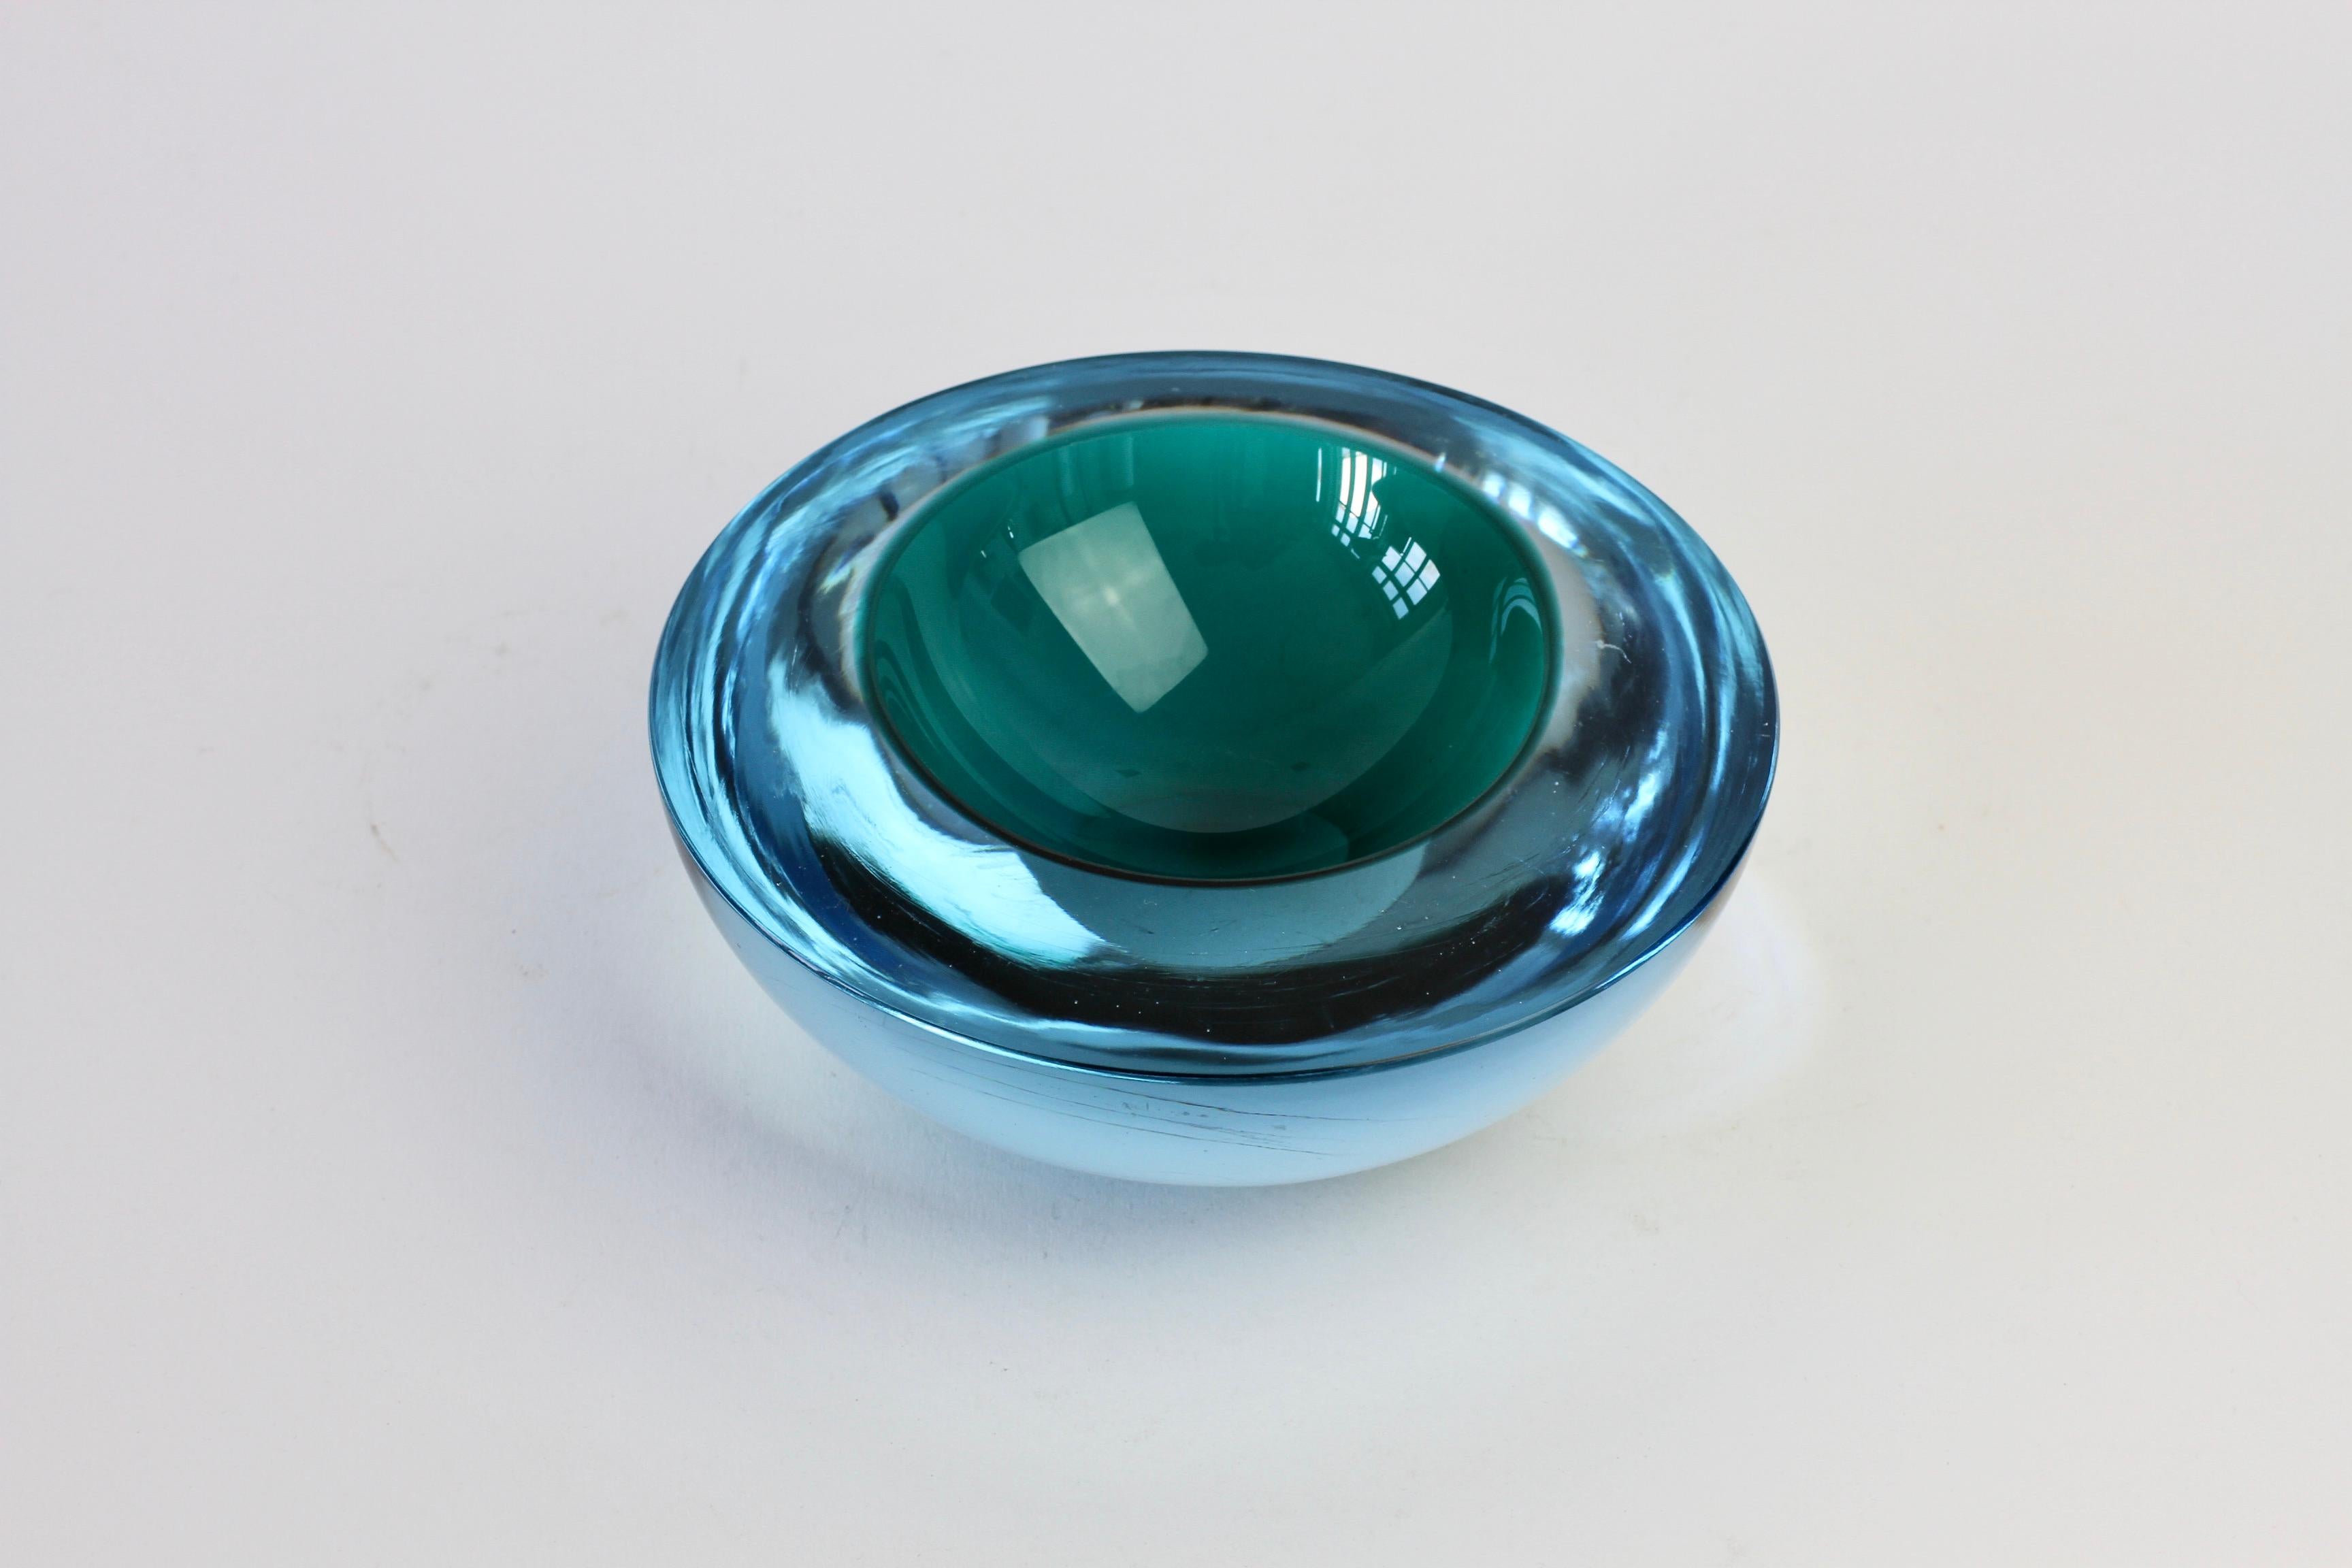 Large Cenedese Italian Blue & Green Sommerso Murano Glass Bowl, Dish or Ashtray 5